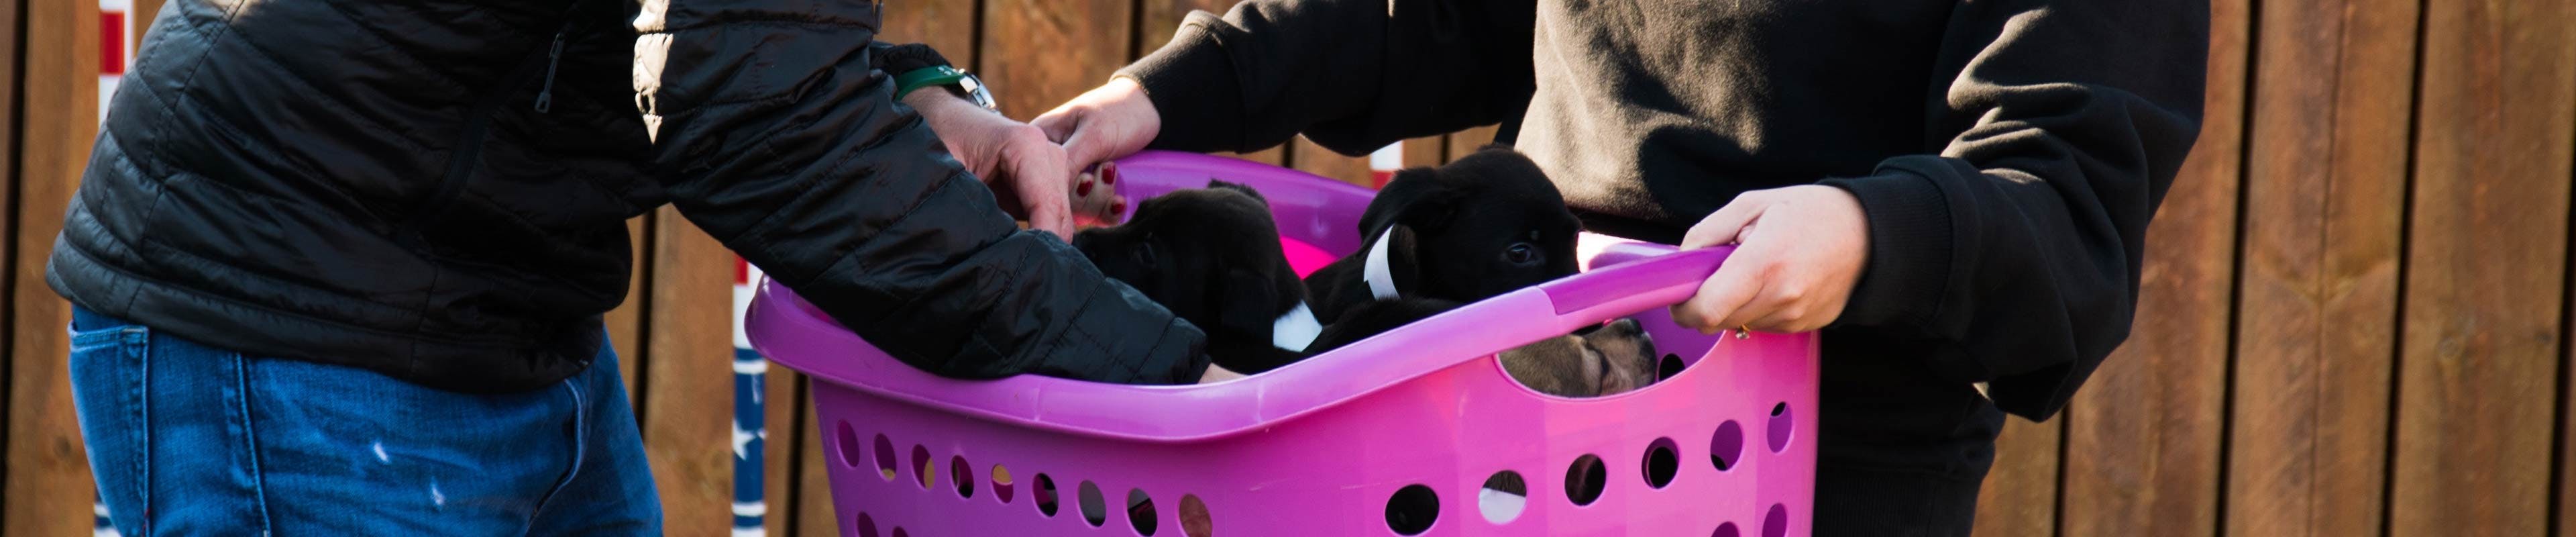 Puppies in a laundry basket